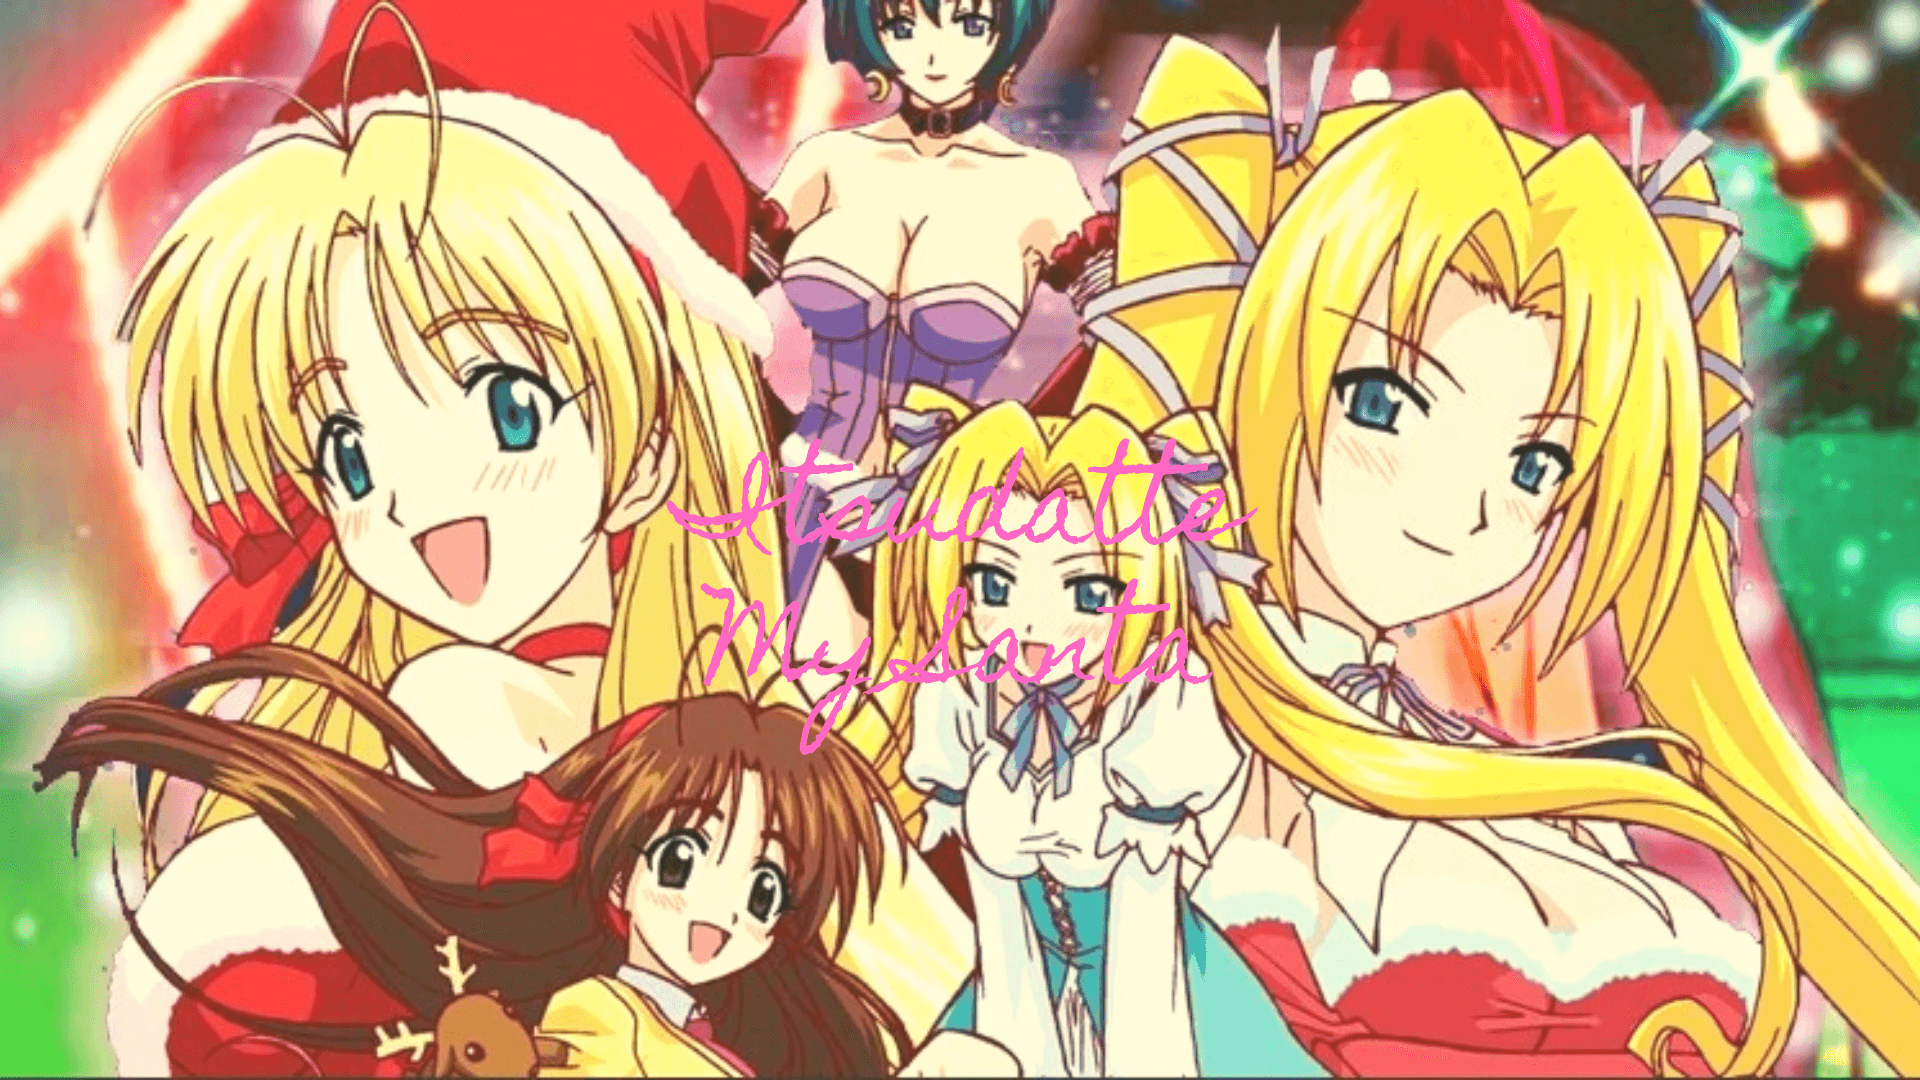 Itsudatte My Santa -The Top 10 Christmas Anime To Watch This Holiday Season